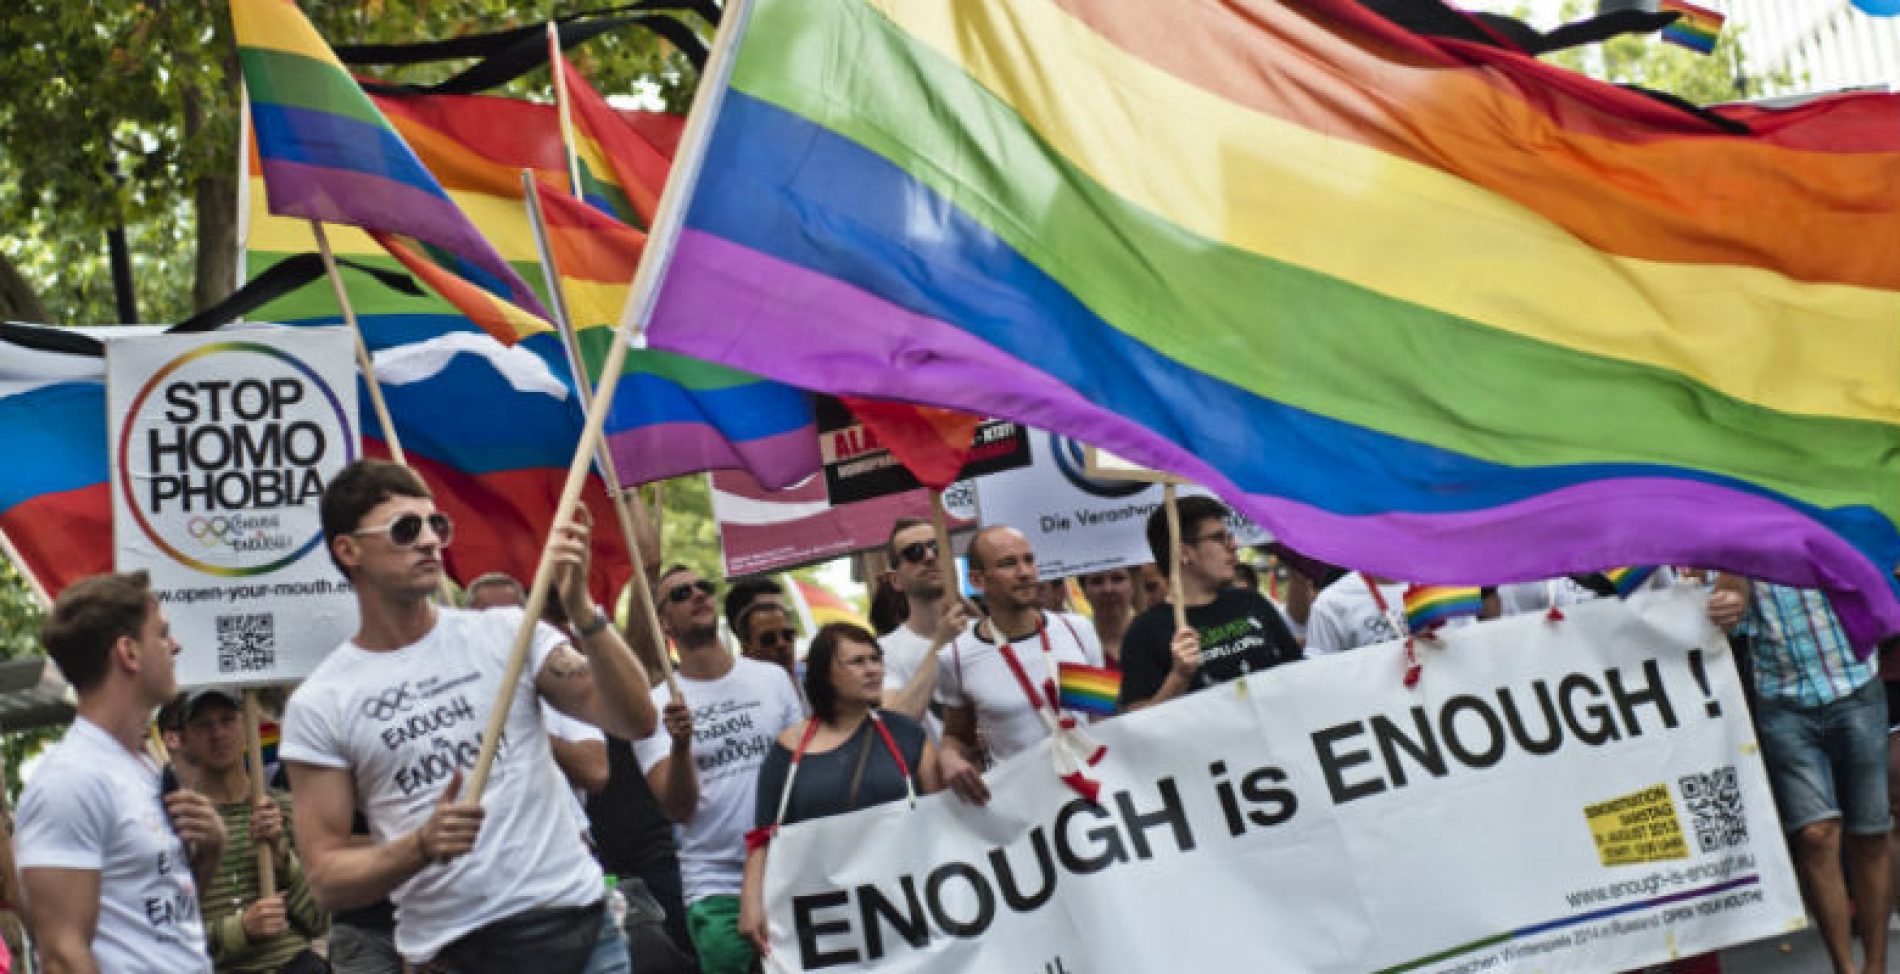 Opinion: Subtle Homophobia Is The New Blatant Homophobia